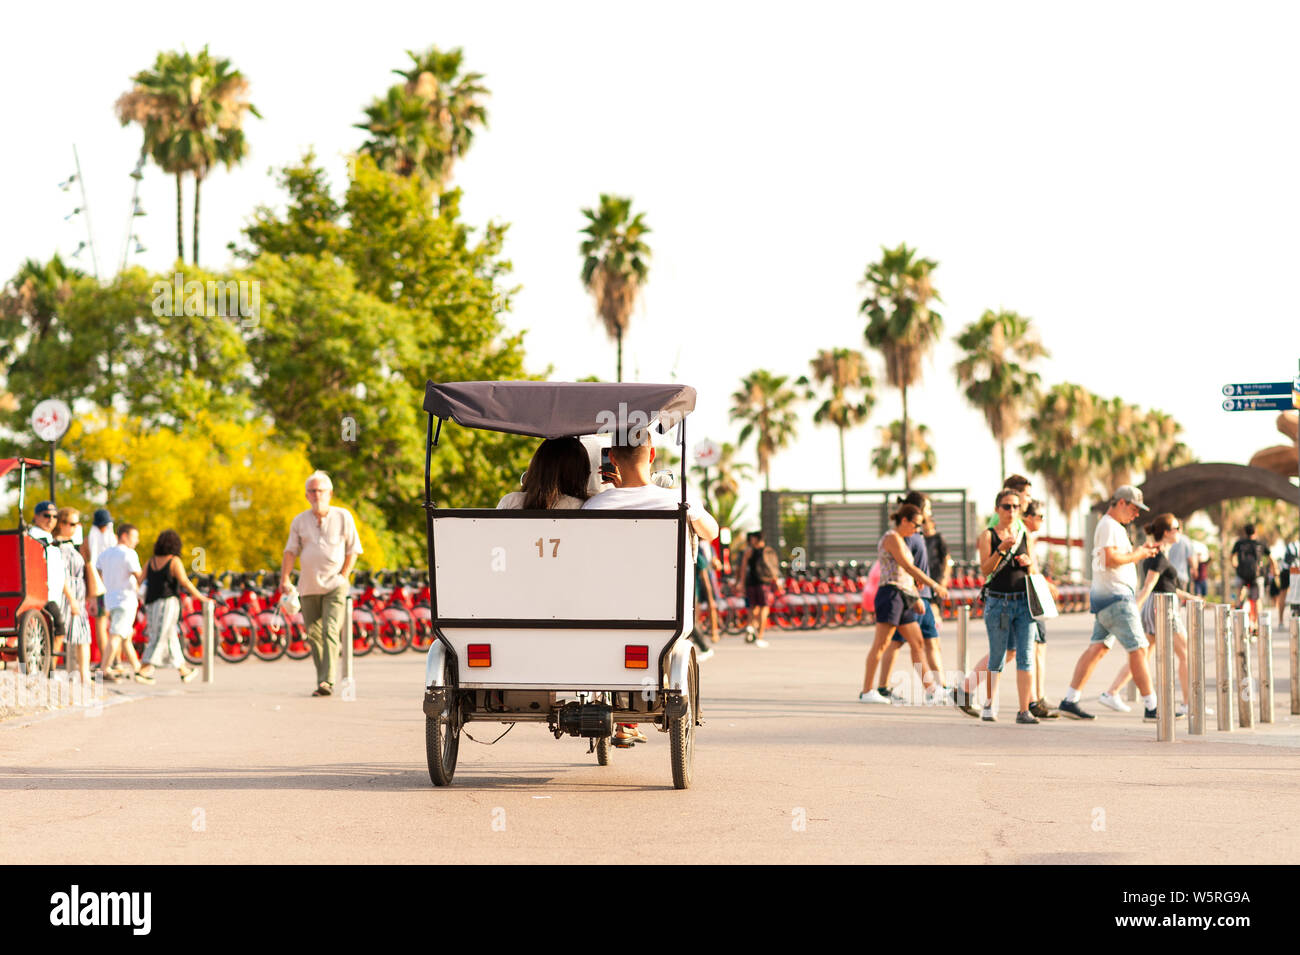 Barcelona, Spain - 7 july 2019: tourists in cycle rickshaw at sunset in the old city port with crowd of people. Mass tourism is becoming a problem in Stock Photo